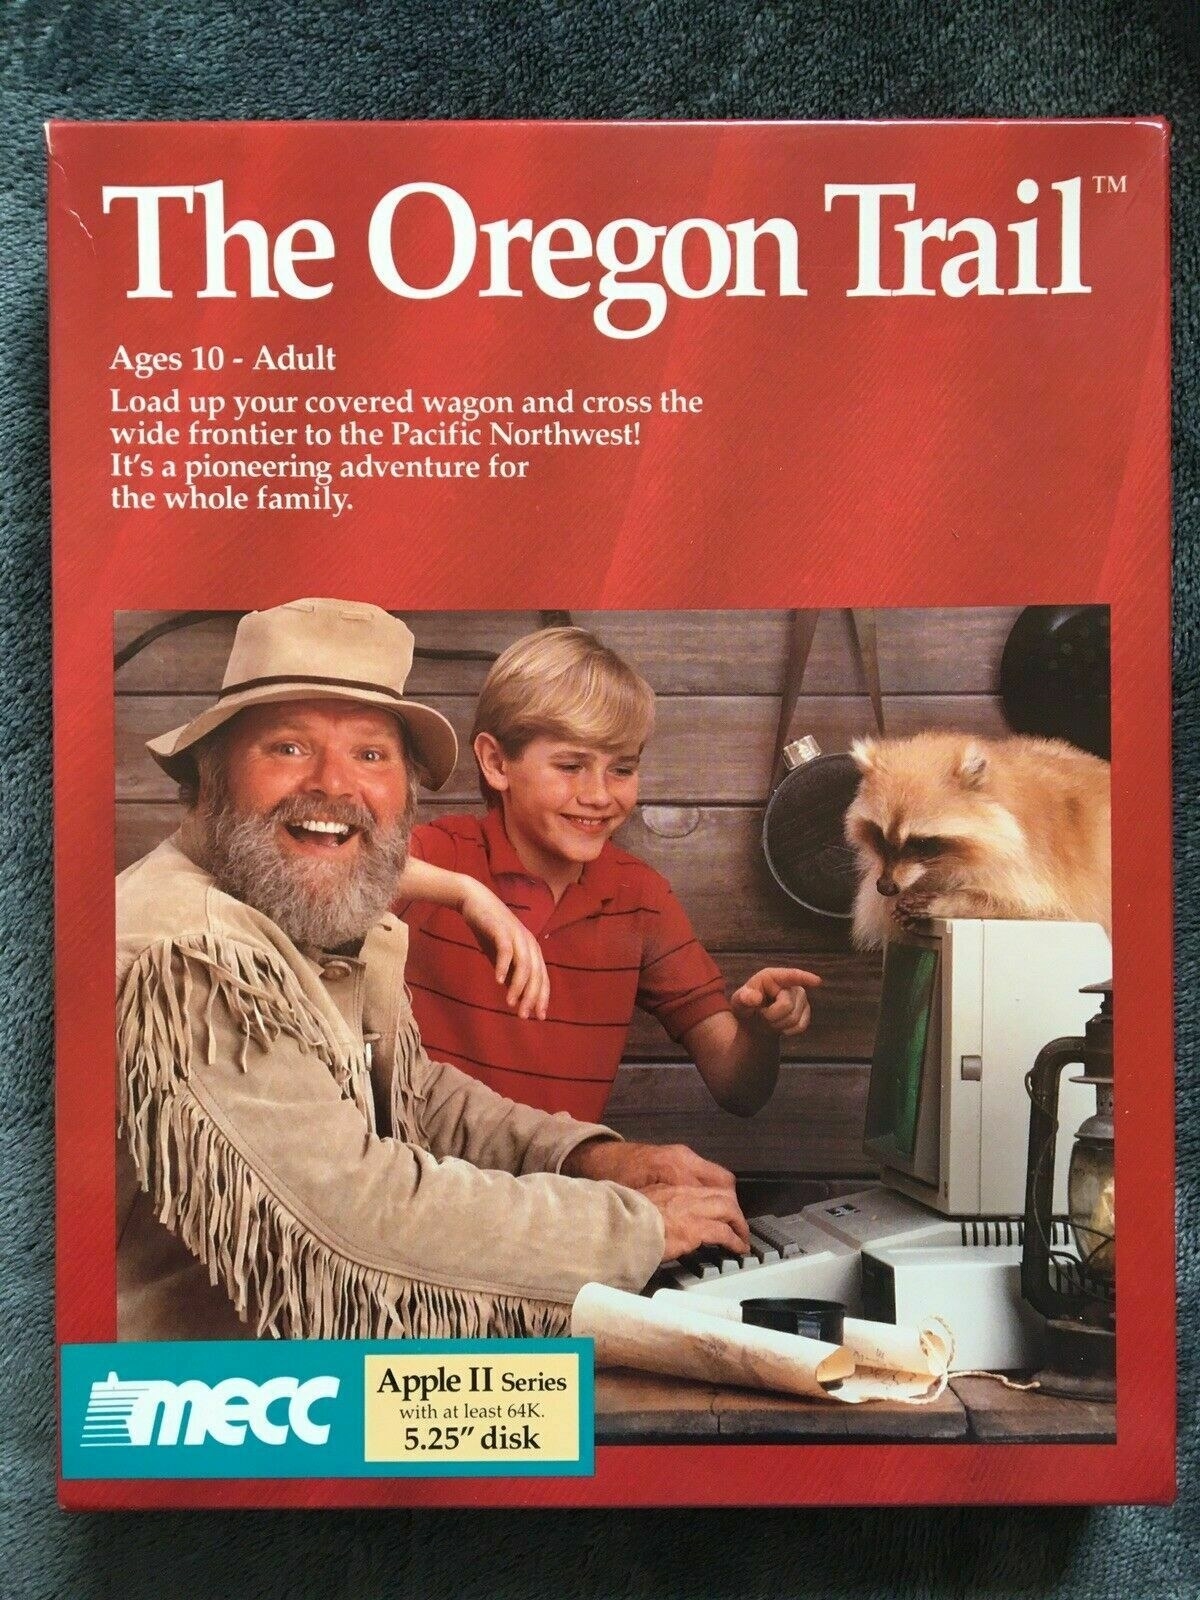 where can i play oregon trail 5th edition online